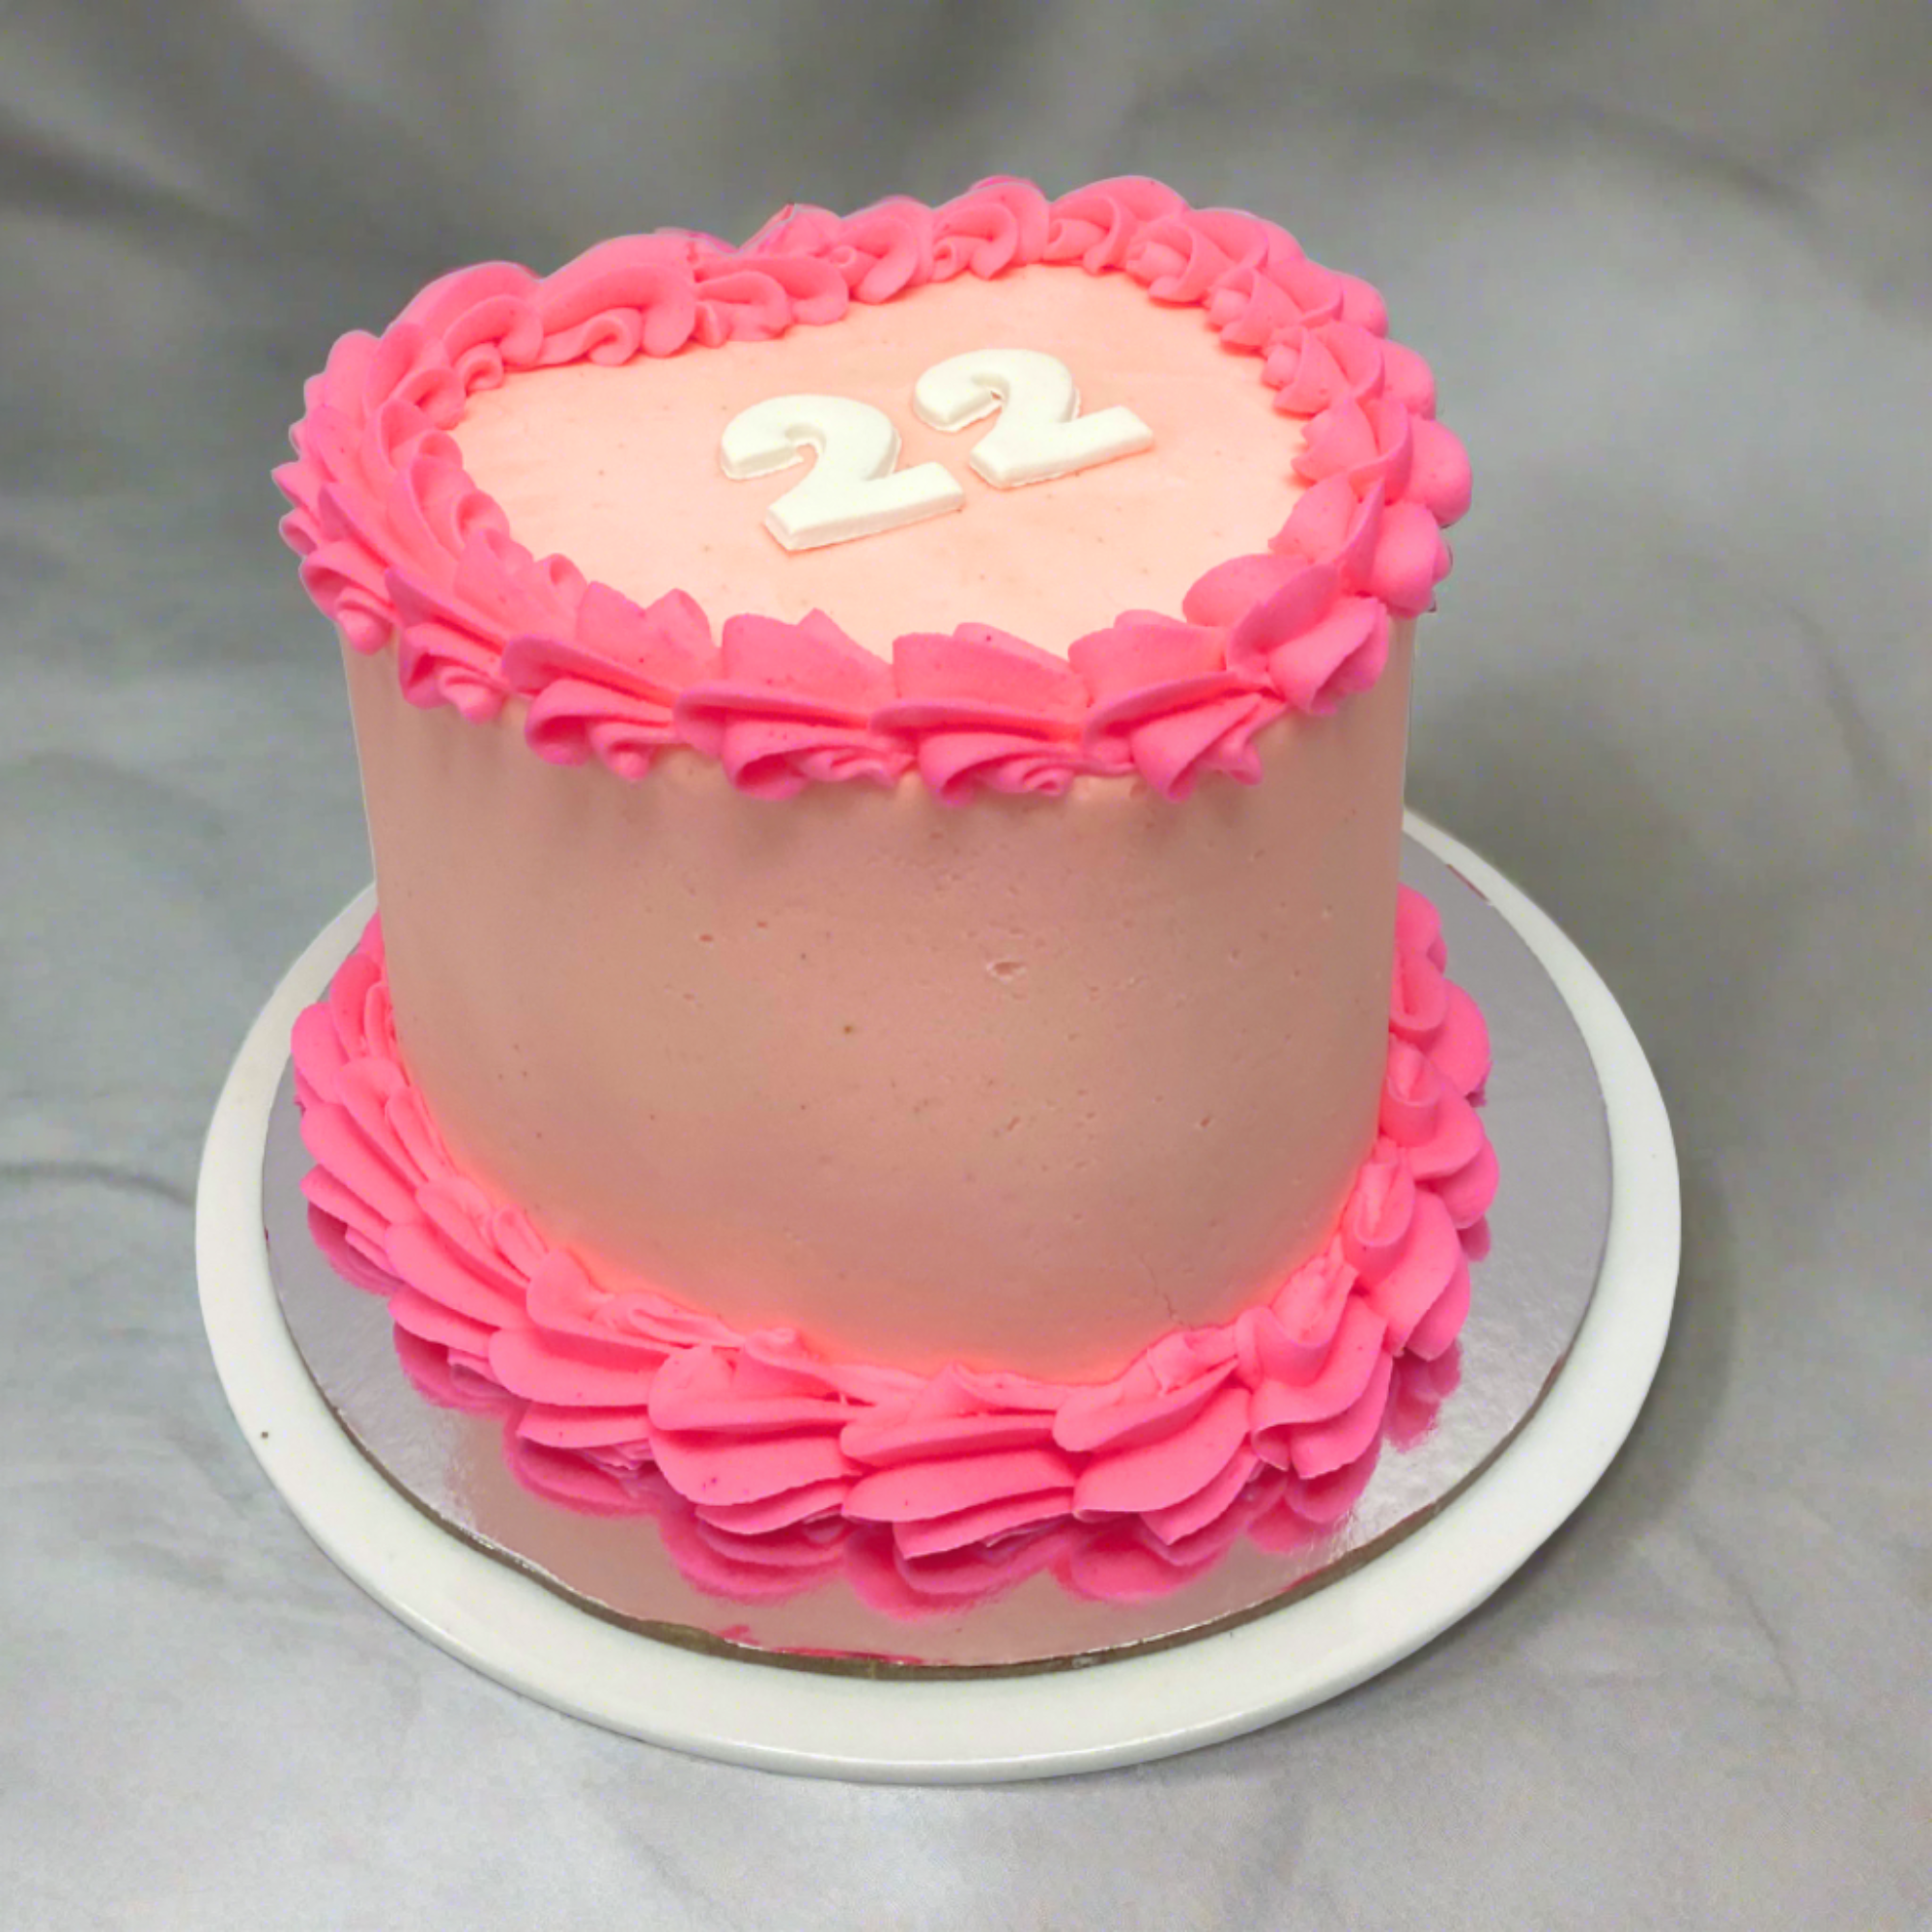 Vintage Heart Cake - Pastel Pink The Cupcake Queens 